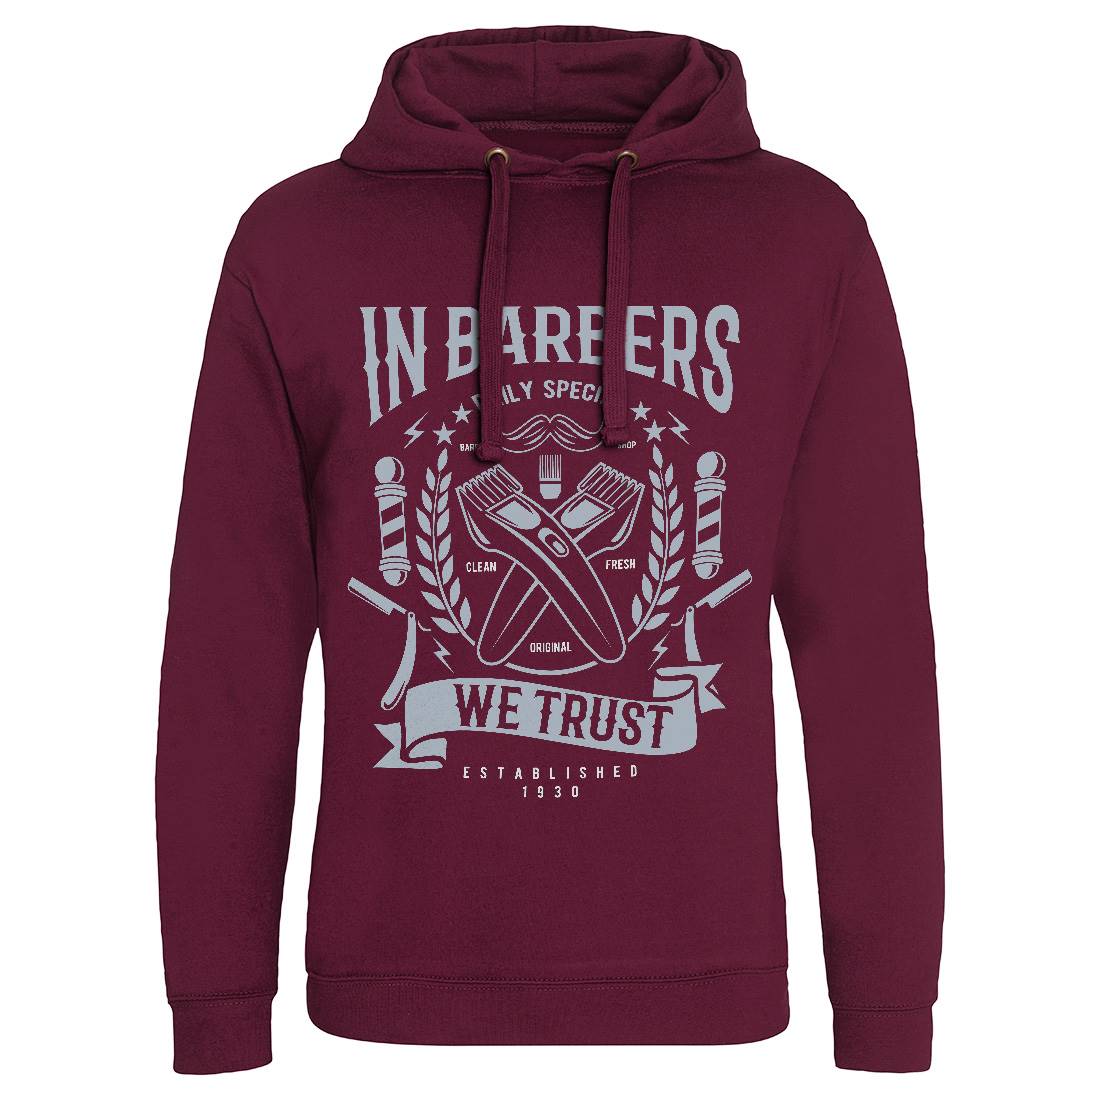 In Barbers We Trust Mens Hoodie Without Pocket Barber A070